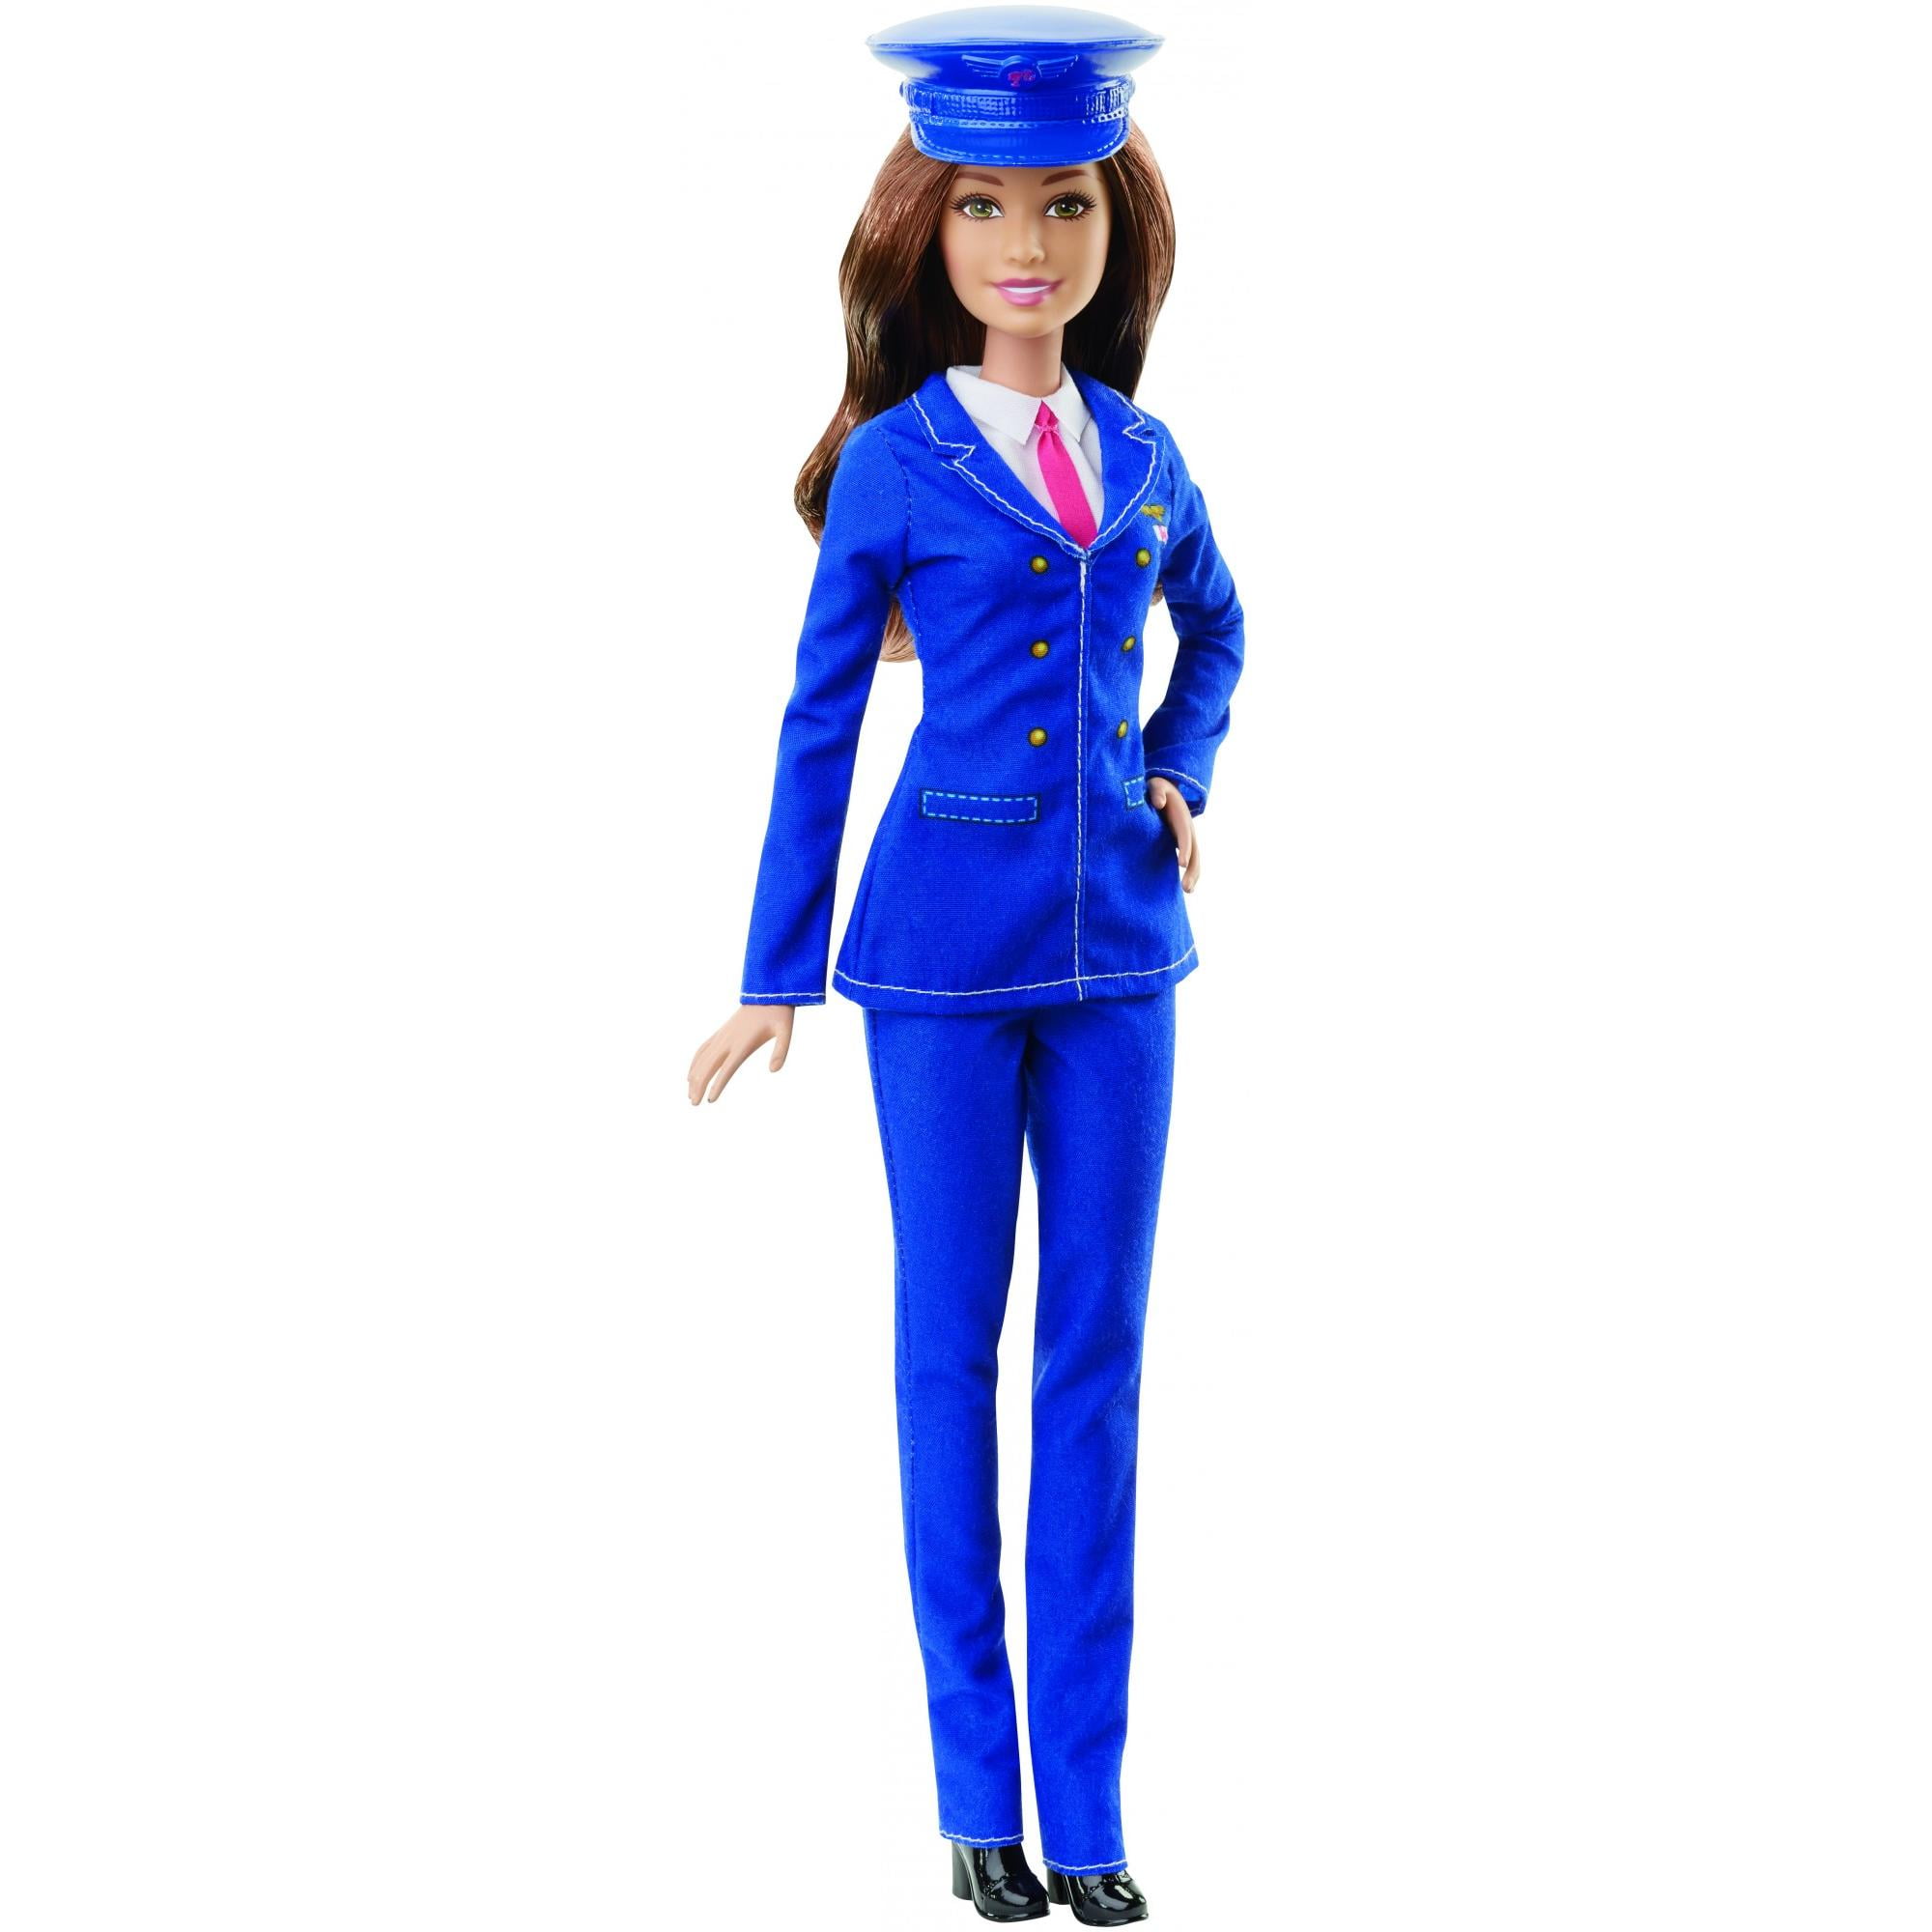 Toy Barbie Mattel Pilot Doll New Toy Paper Doll 